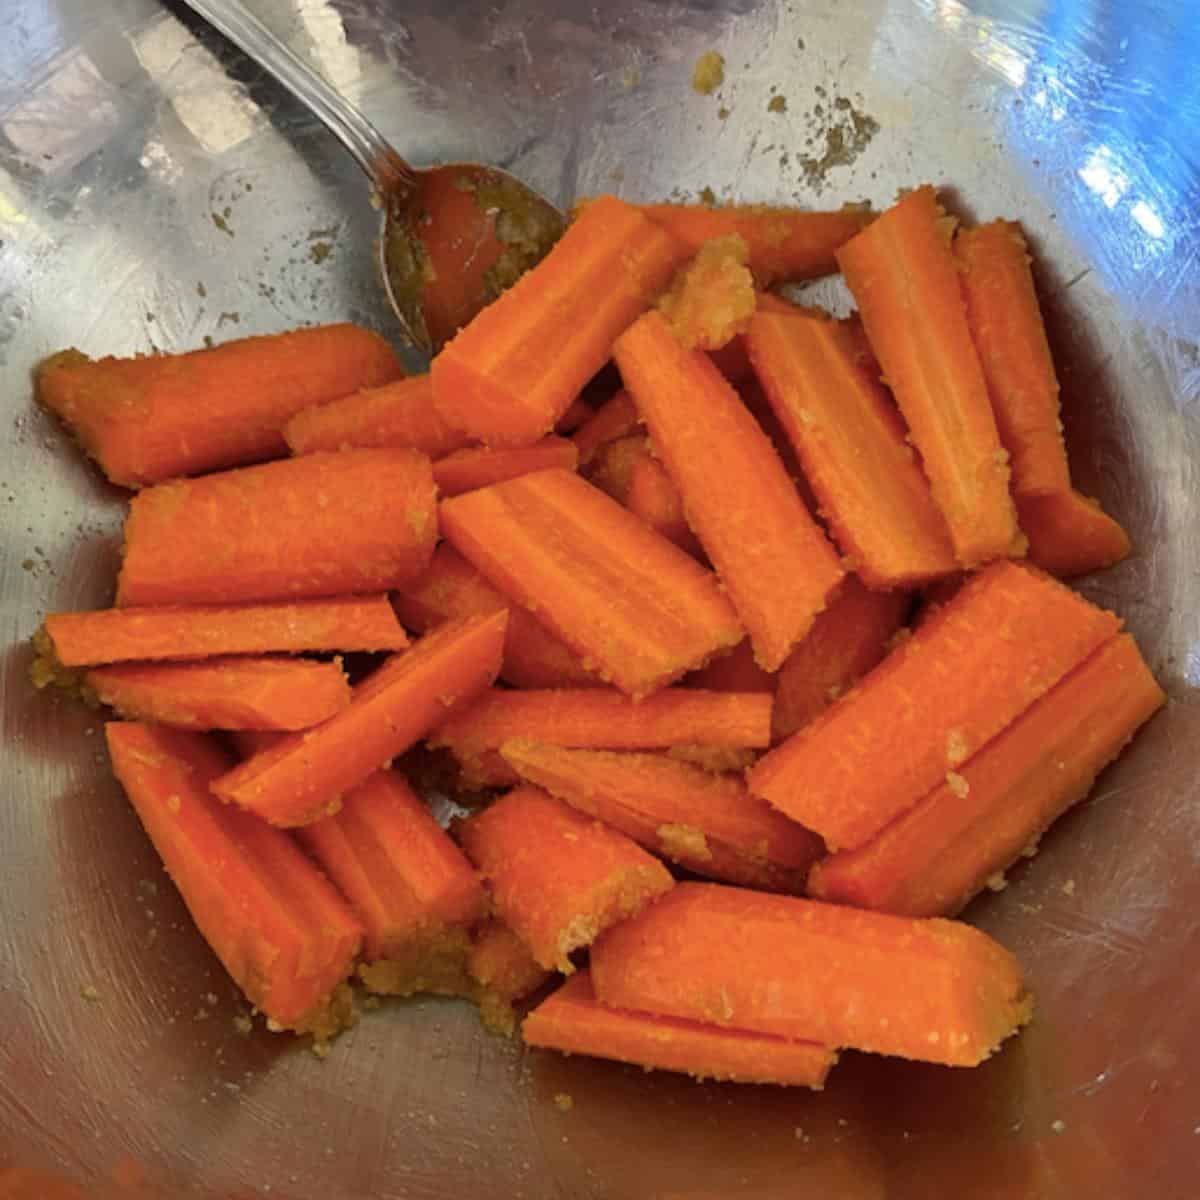 carrots in stainless steel bowl tossed in glaze